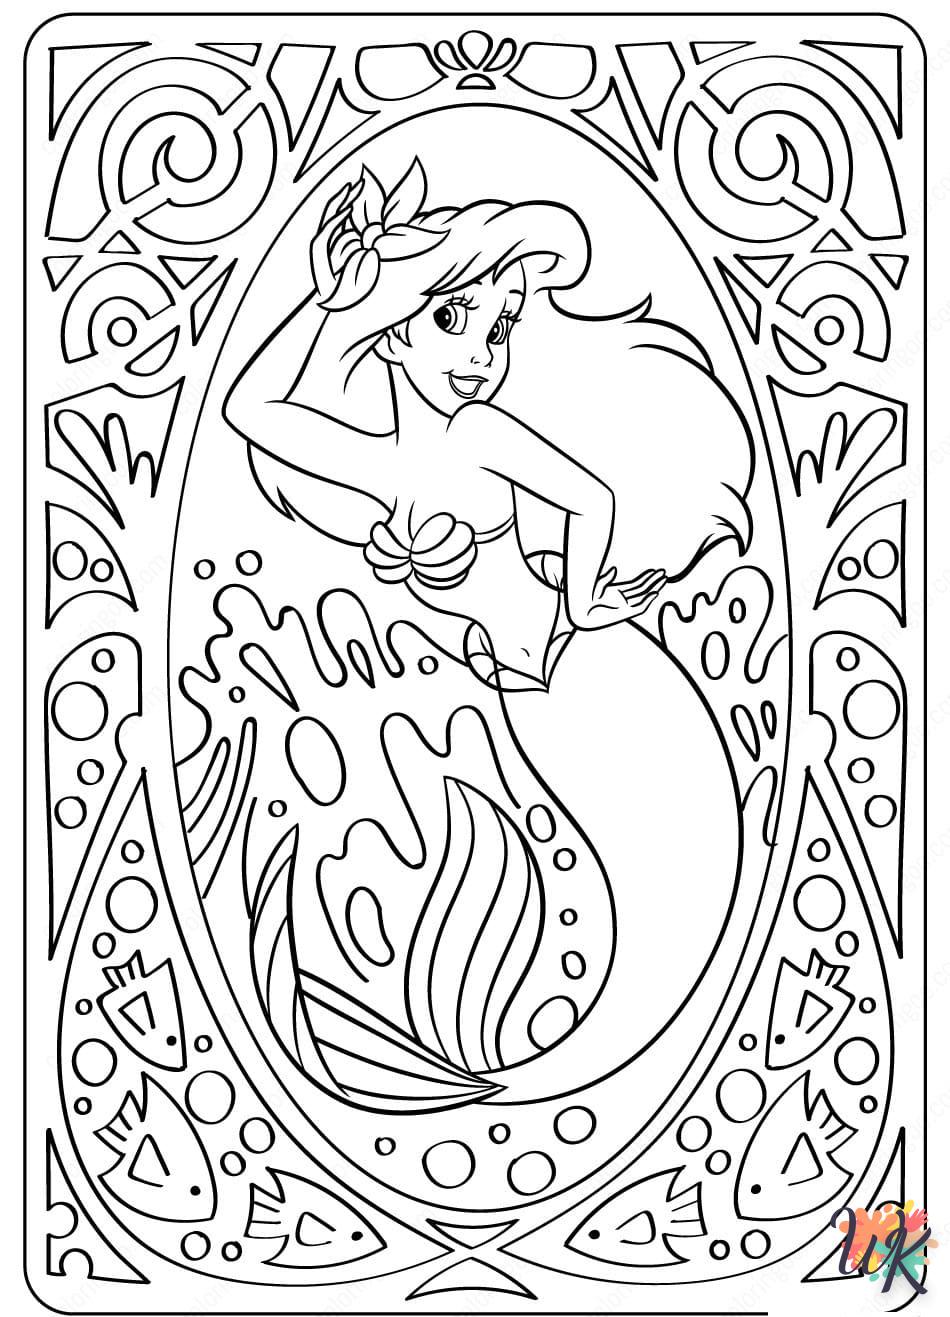 Disney coloring page to print for 4 year olds 1